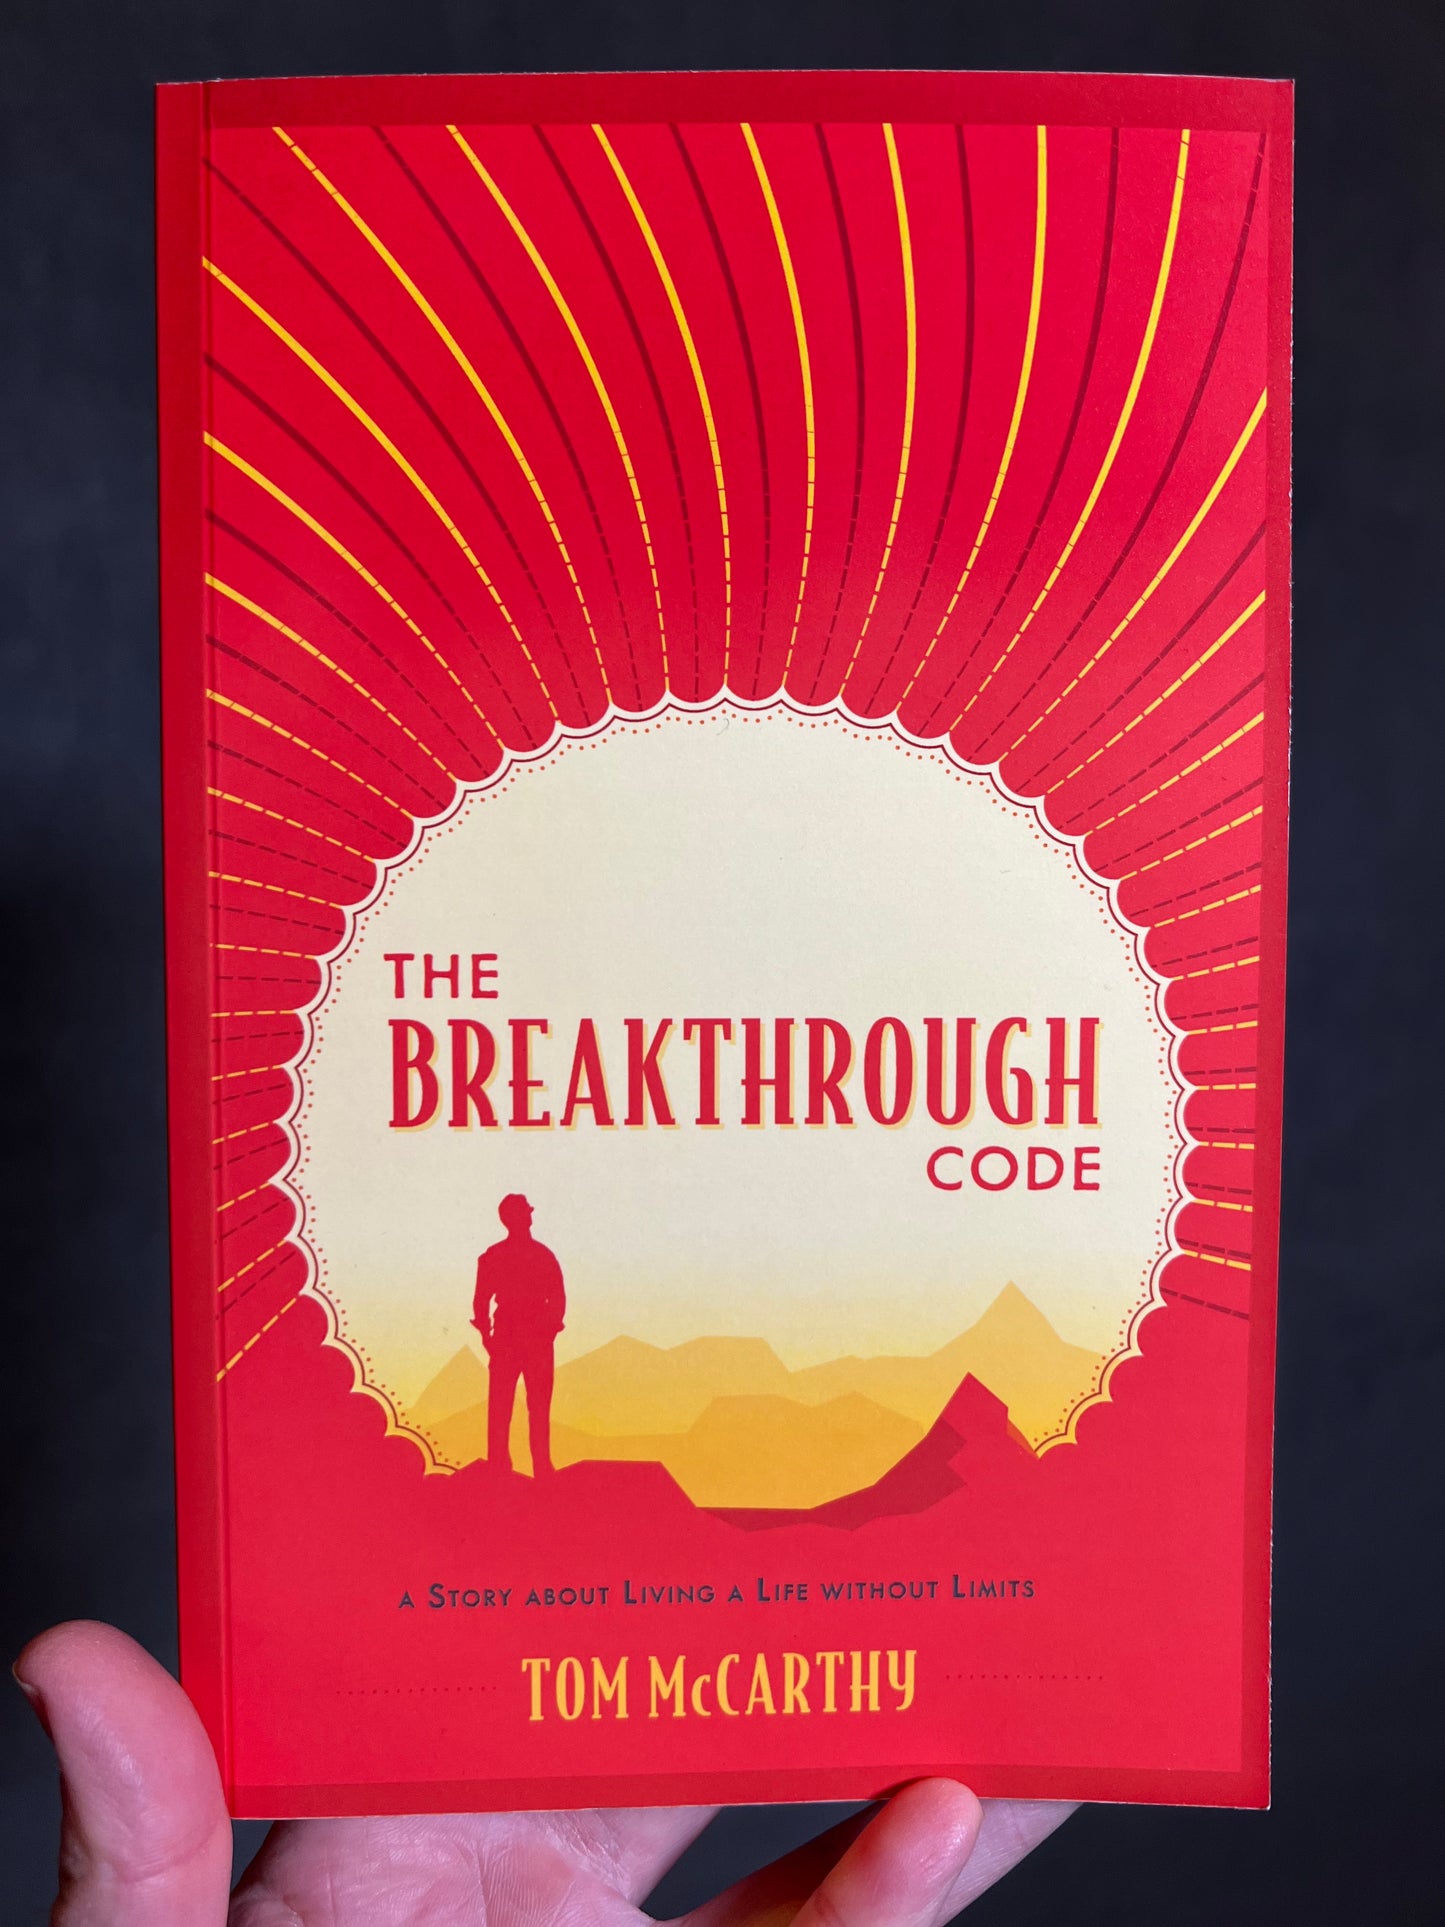 The Breakthrough Code by Tom McCarthy